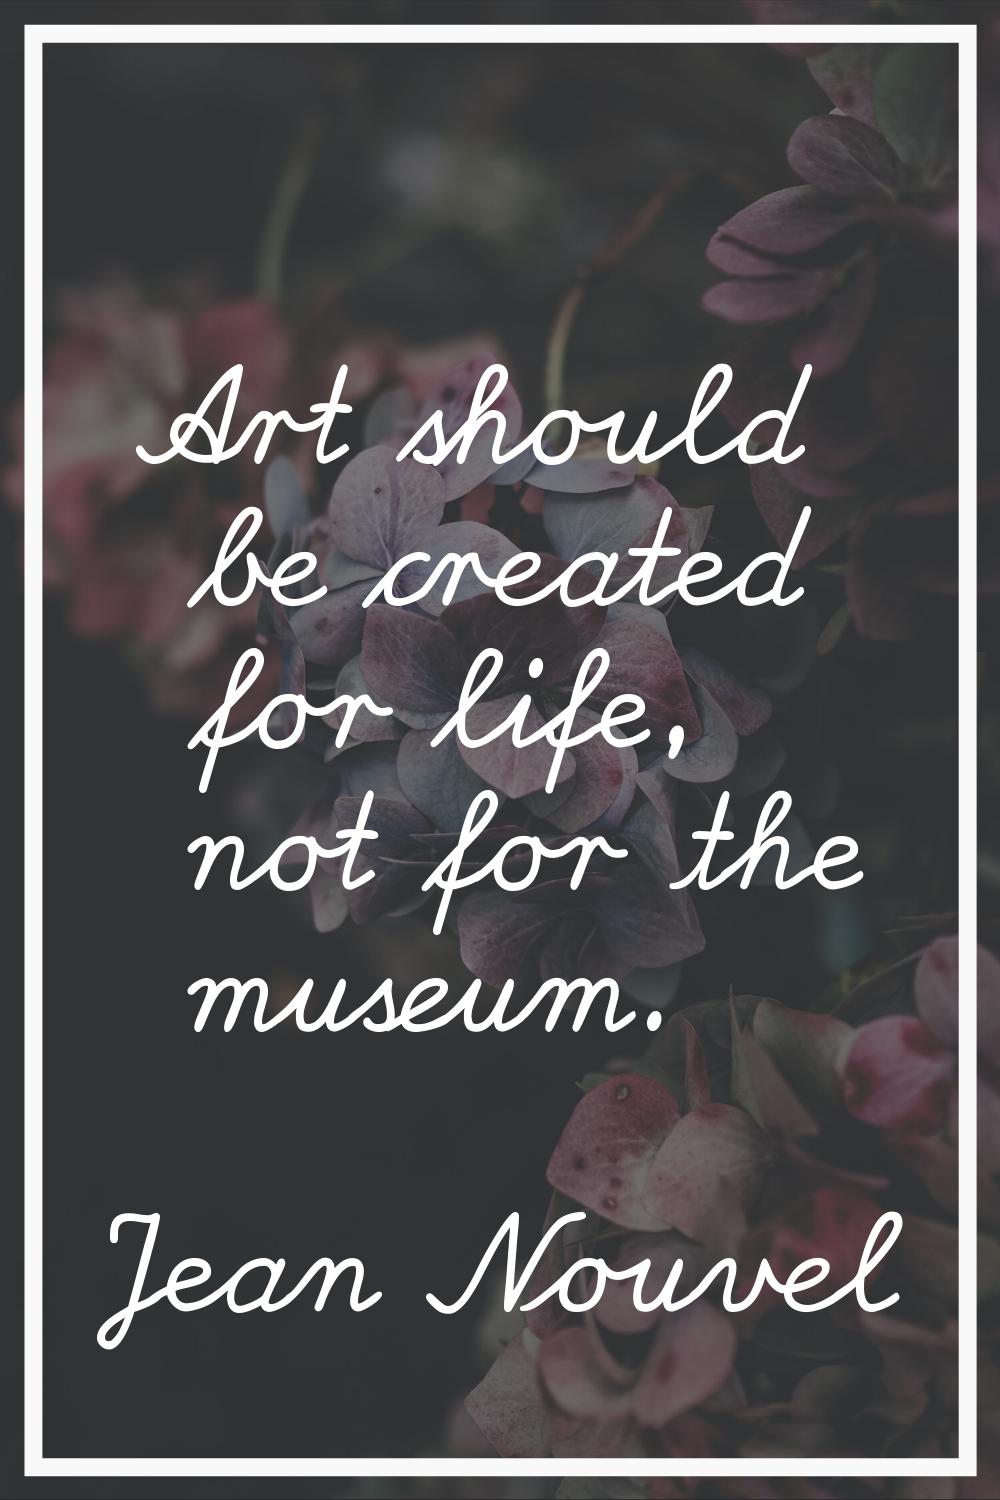 Art should be created for life, not for the museum.